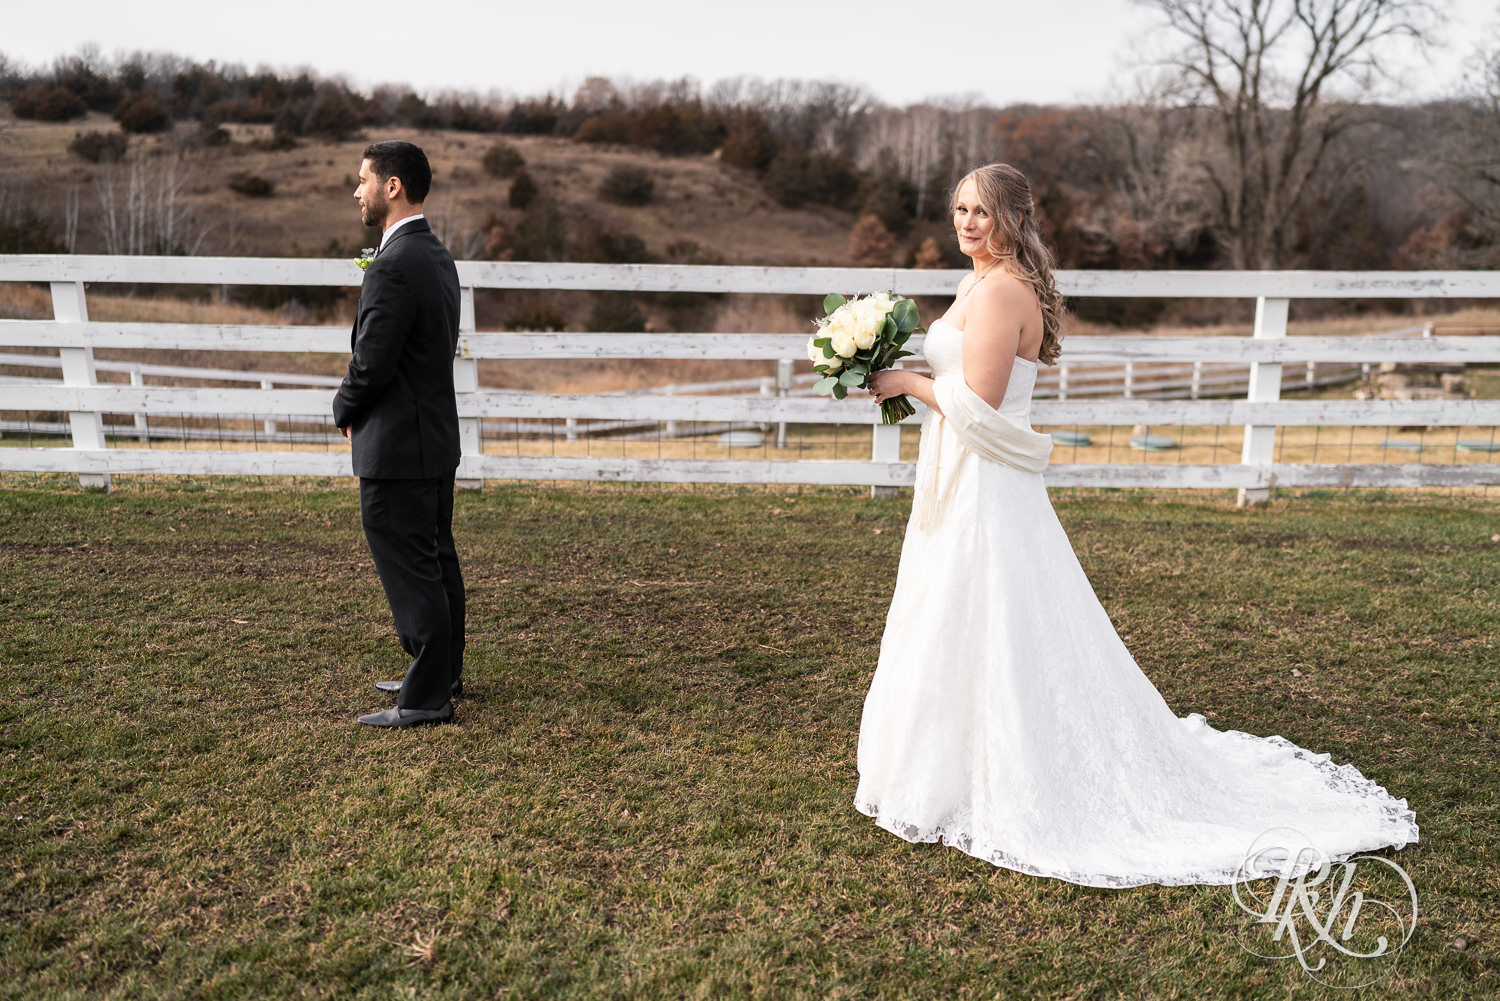 Bride and groom share first look on wedding day at Almquist Farm in Hastings, Minnesota.